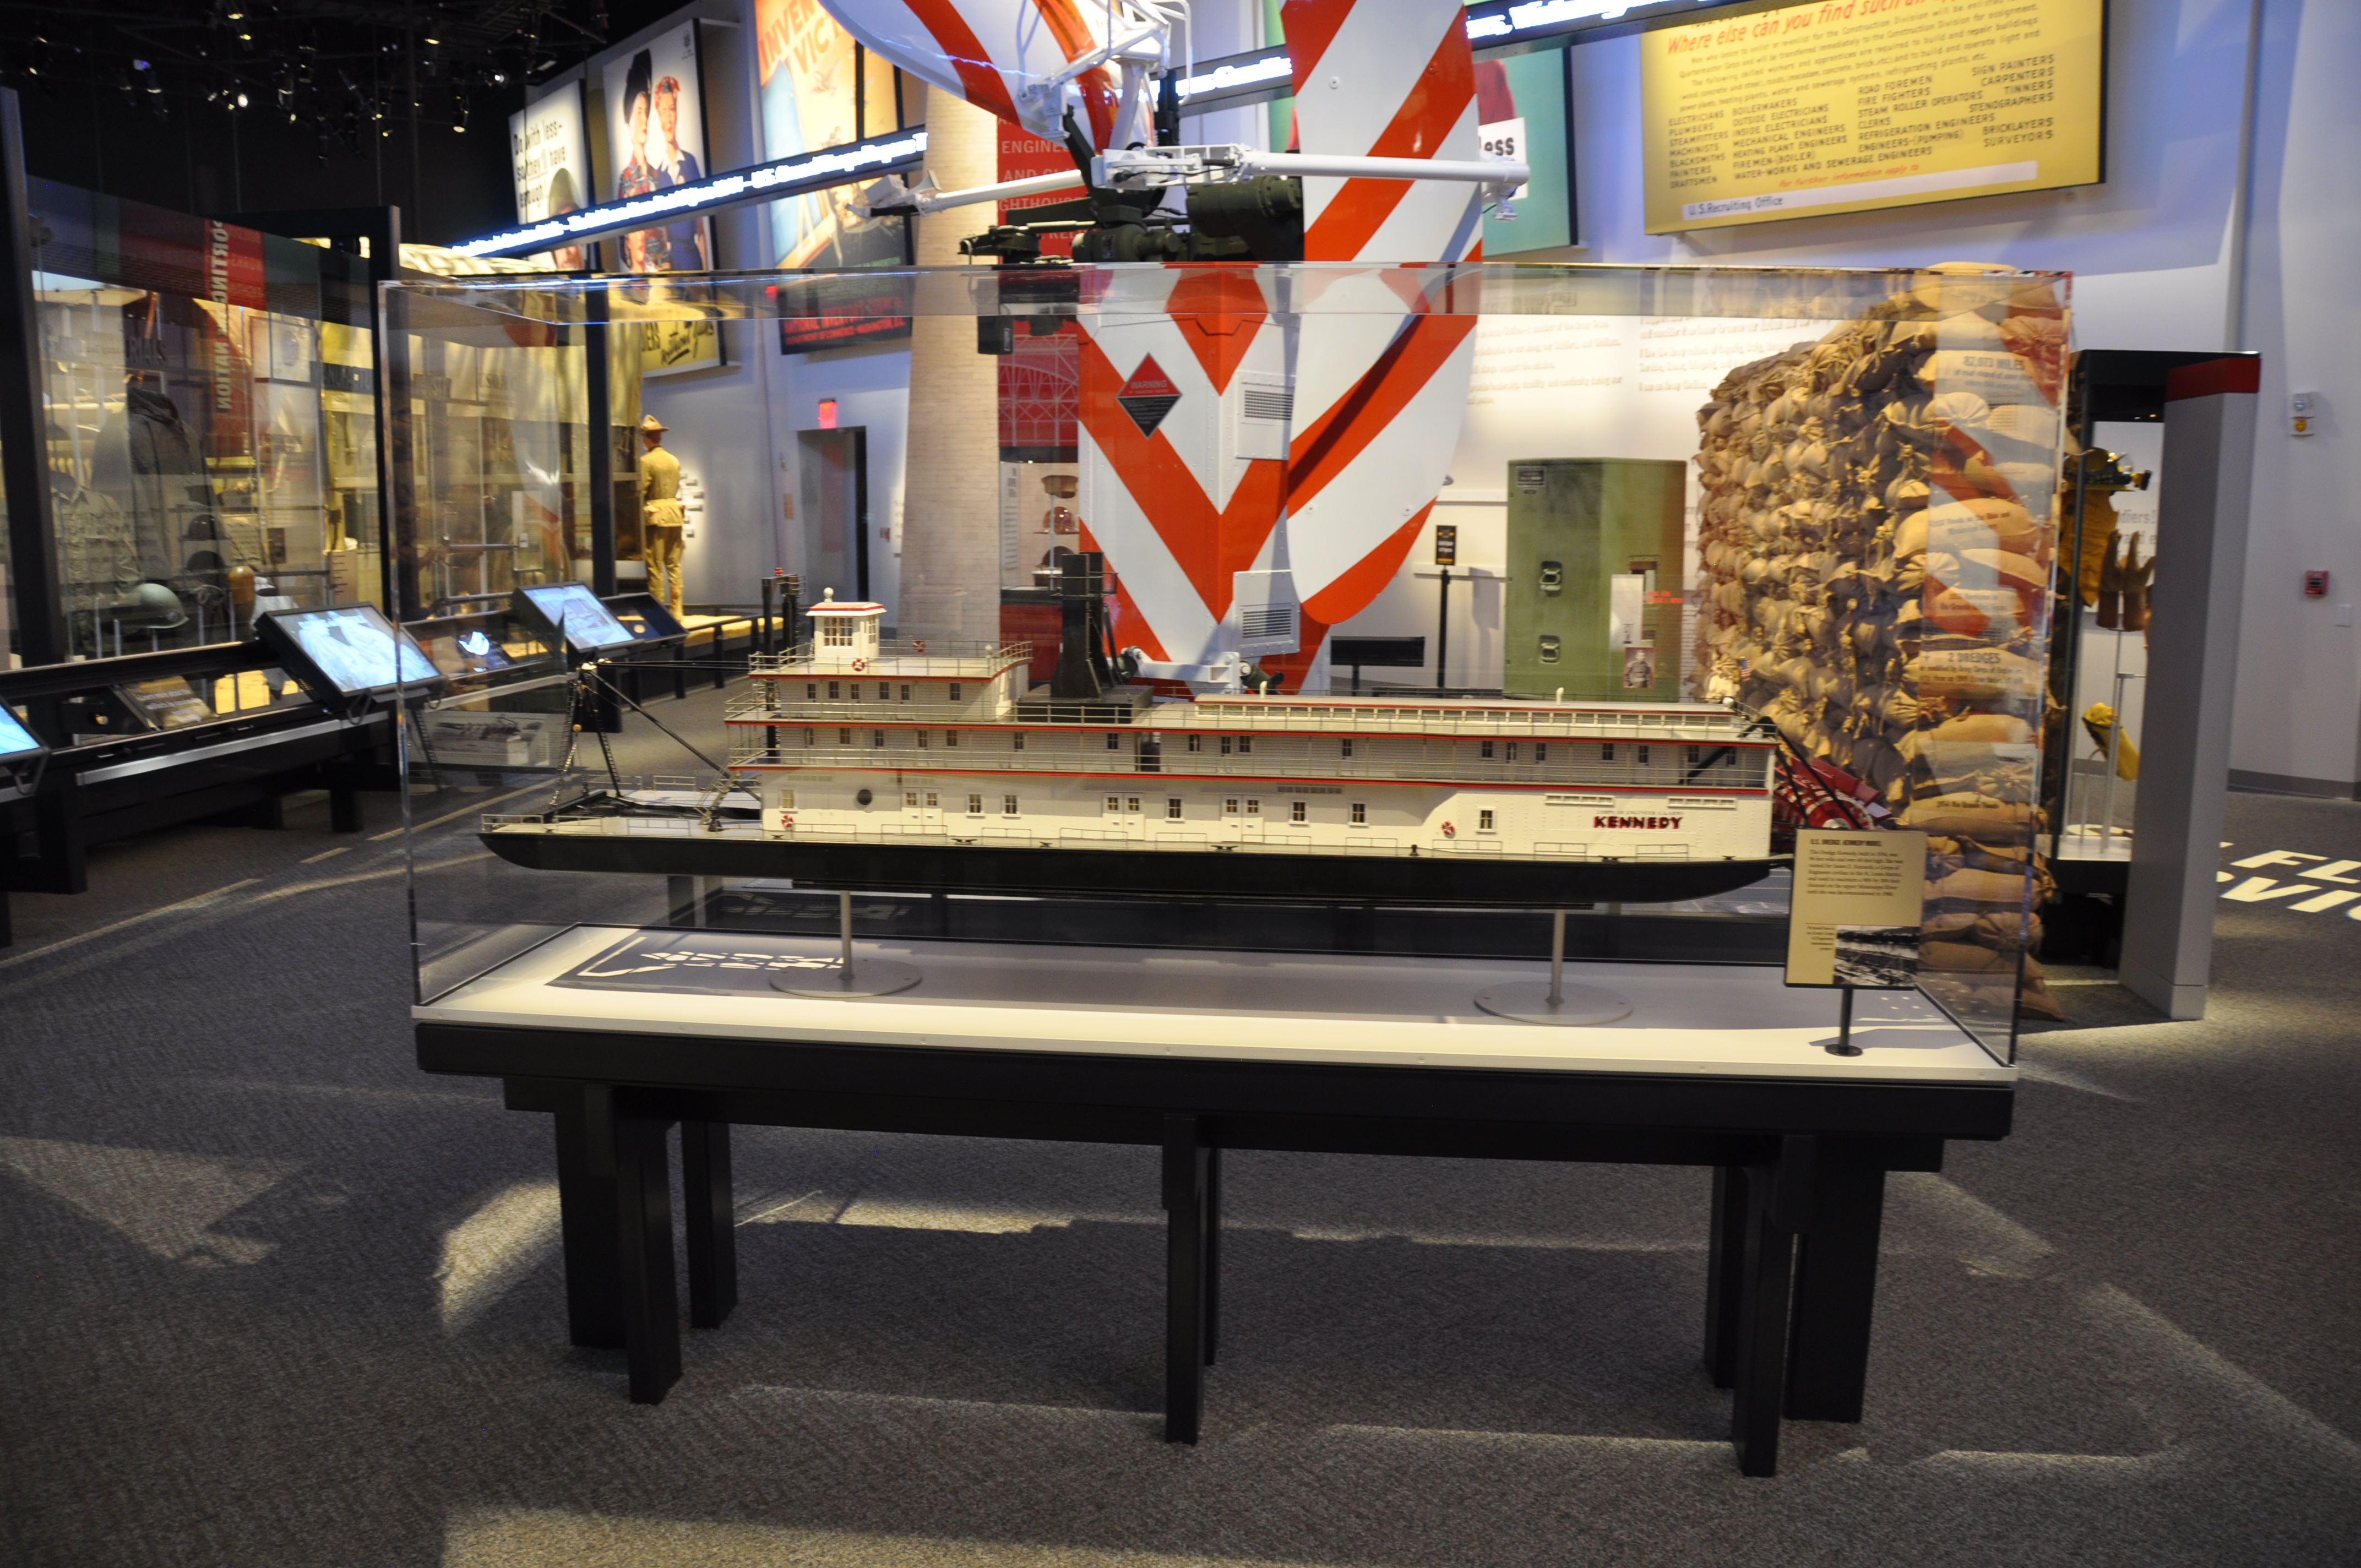 A scale model of a dredge under a case